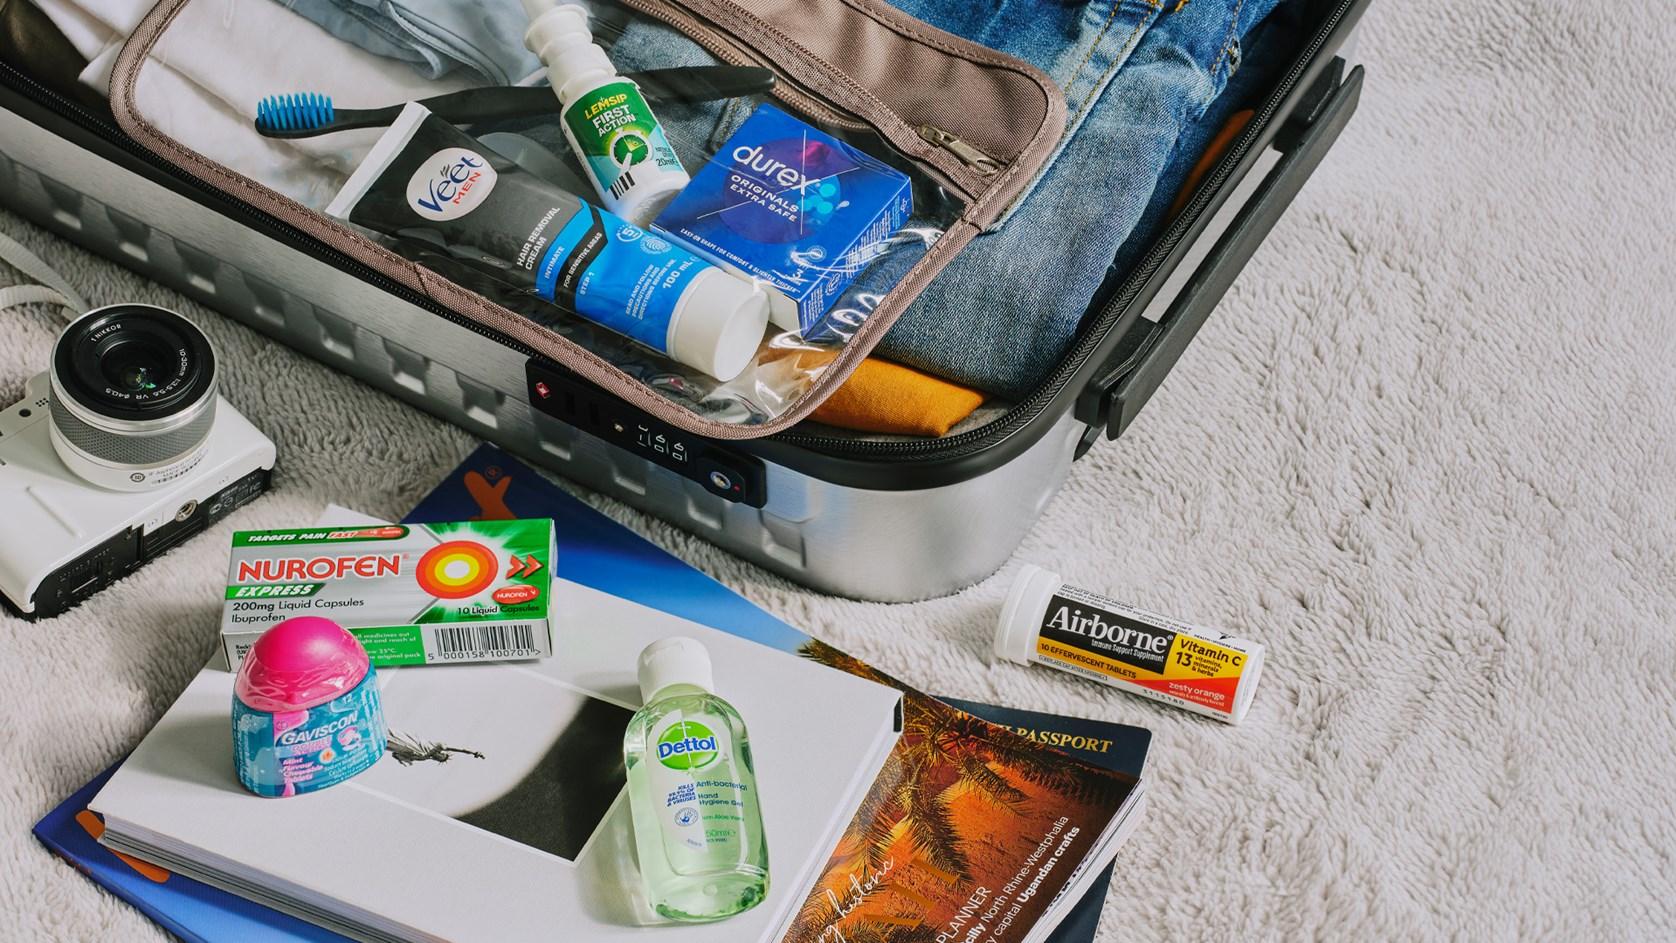 Reckitt brands' products spill out of a suitcase packed for a holiday - Nurofen, Durex, Veet, Airborne, Dettol and Gaviscon